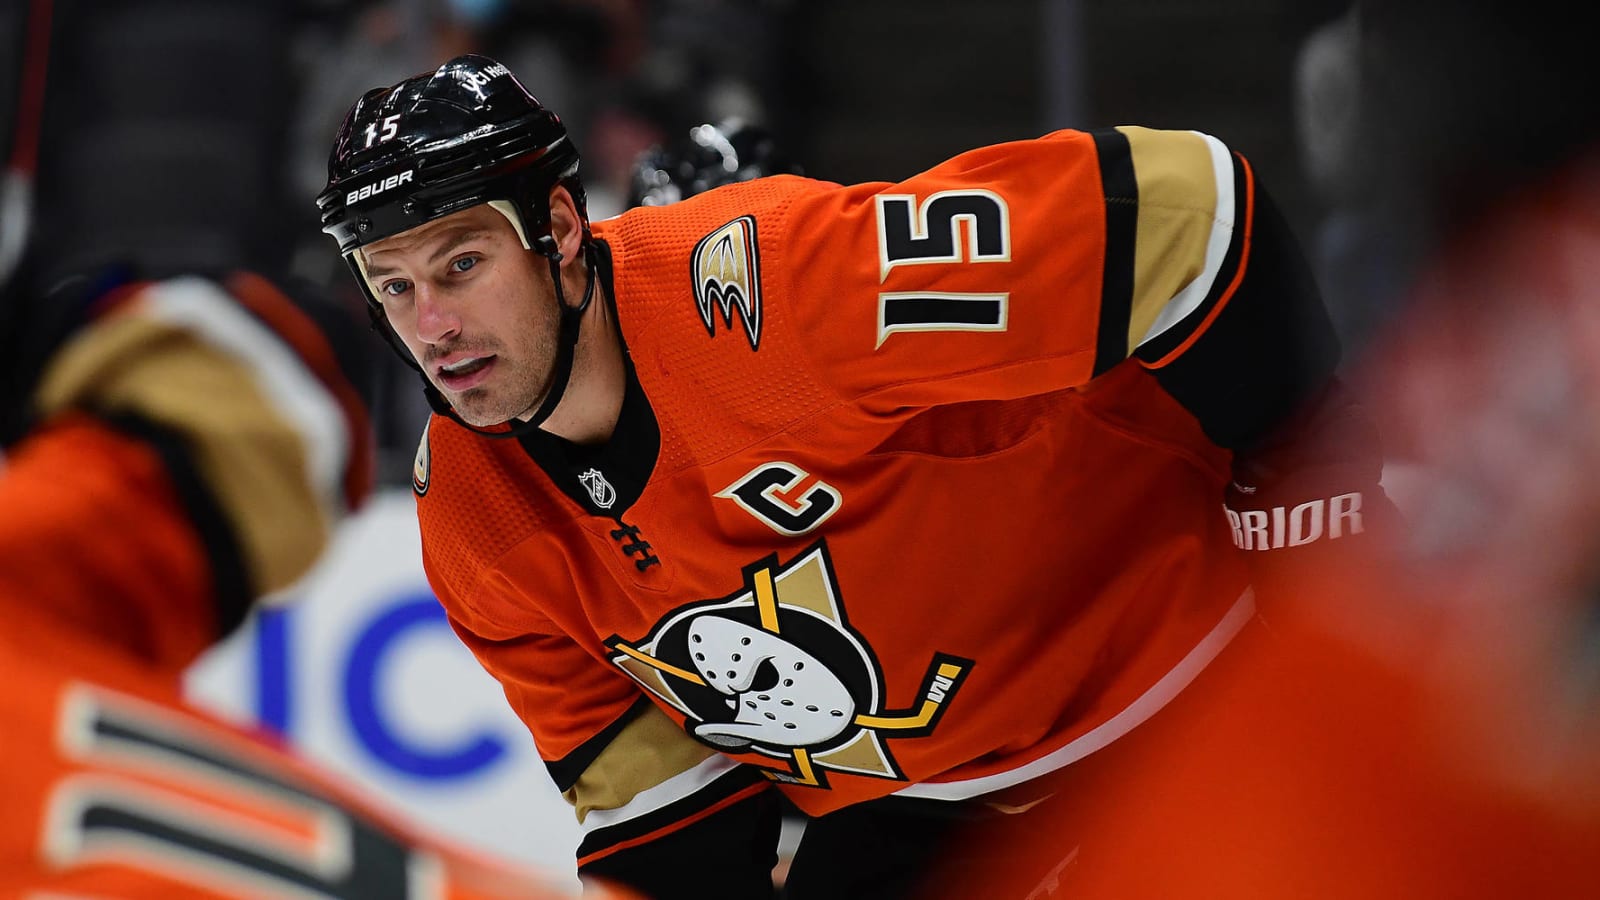 Ryan Getzlaf out, week to week with a lower-body injury